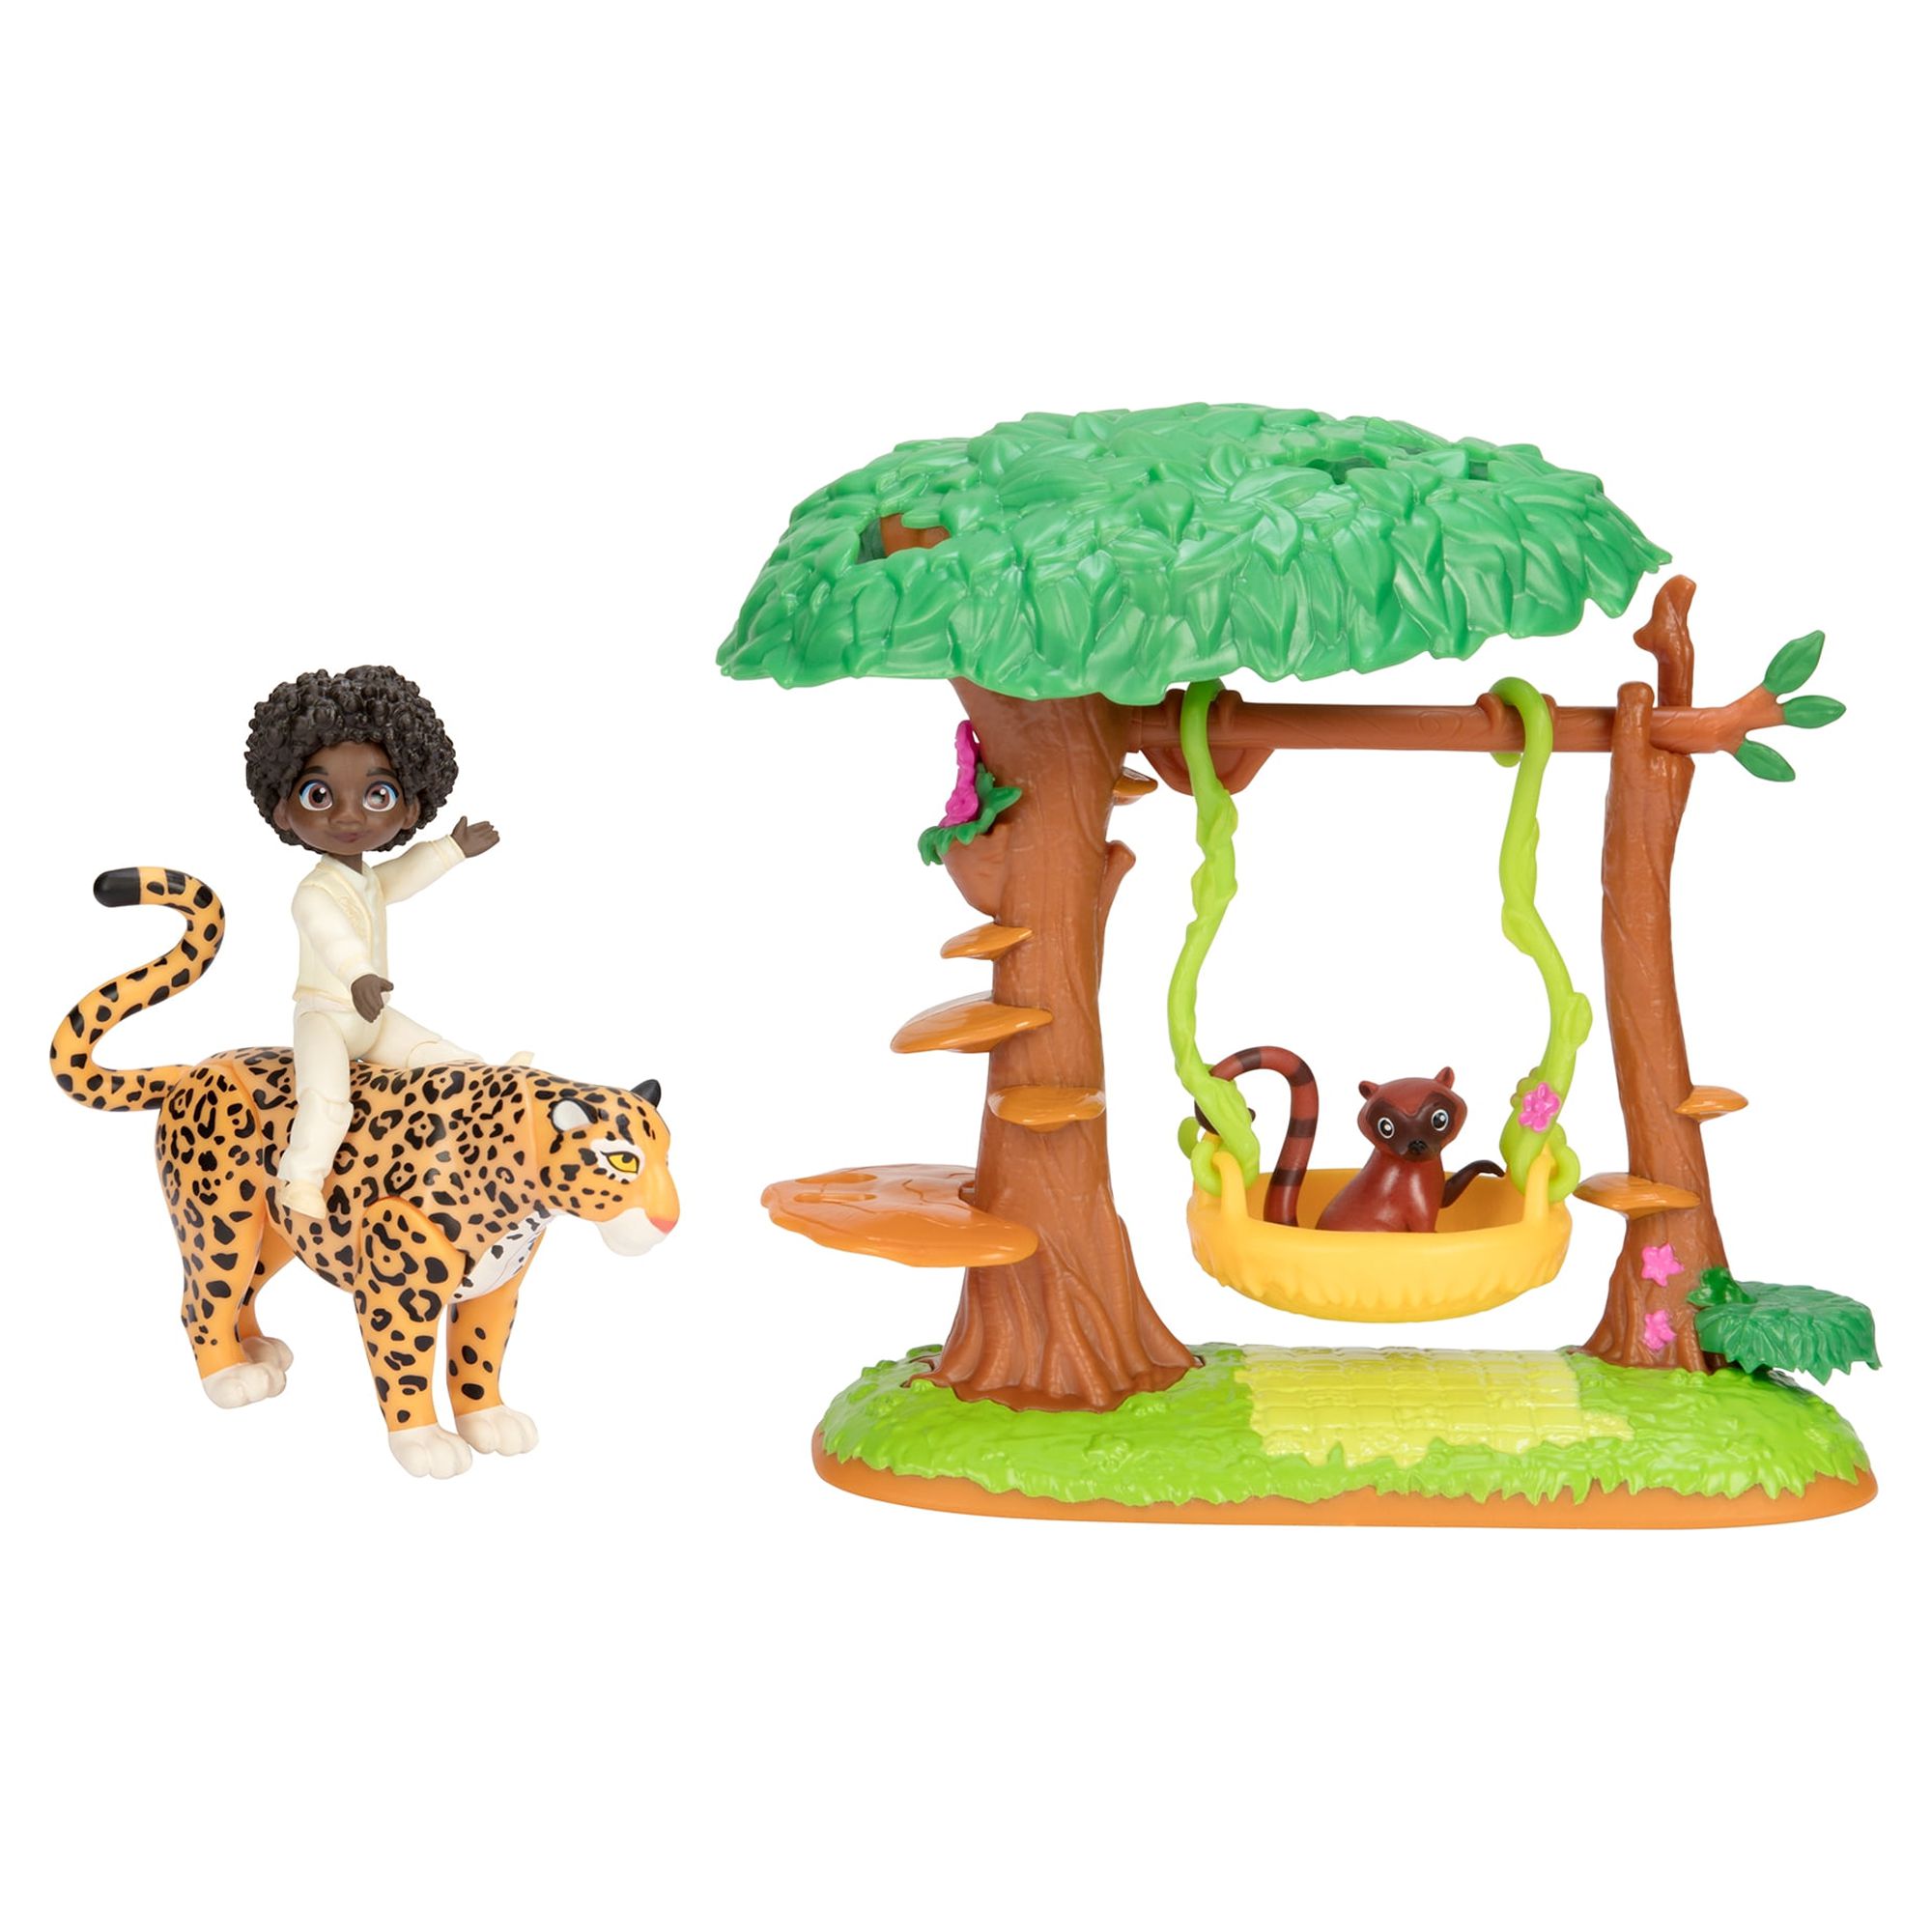 Disney Encanto Antonio's Step & Swing Small Doll Playset, Includes 3 Accessories, for Children Ages 3+ - image 1 of 5